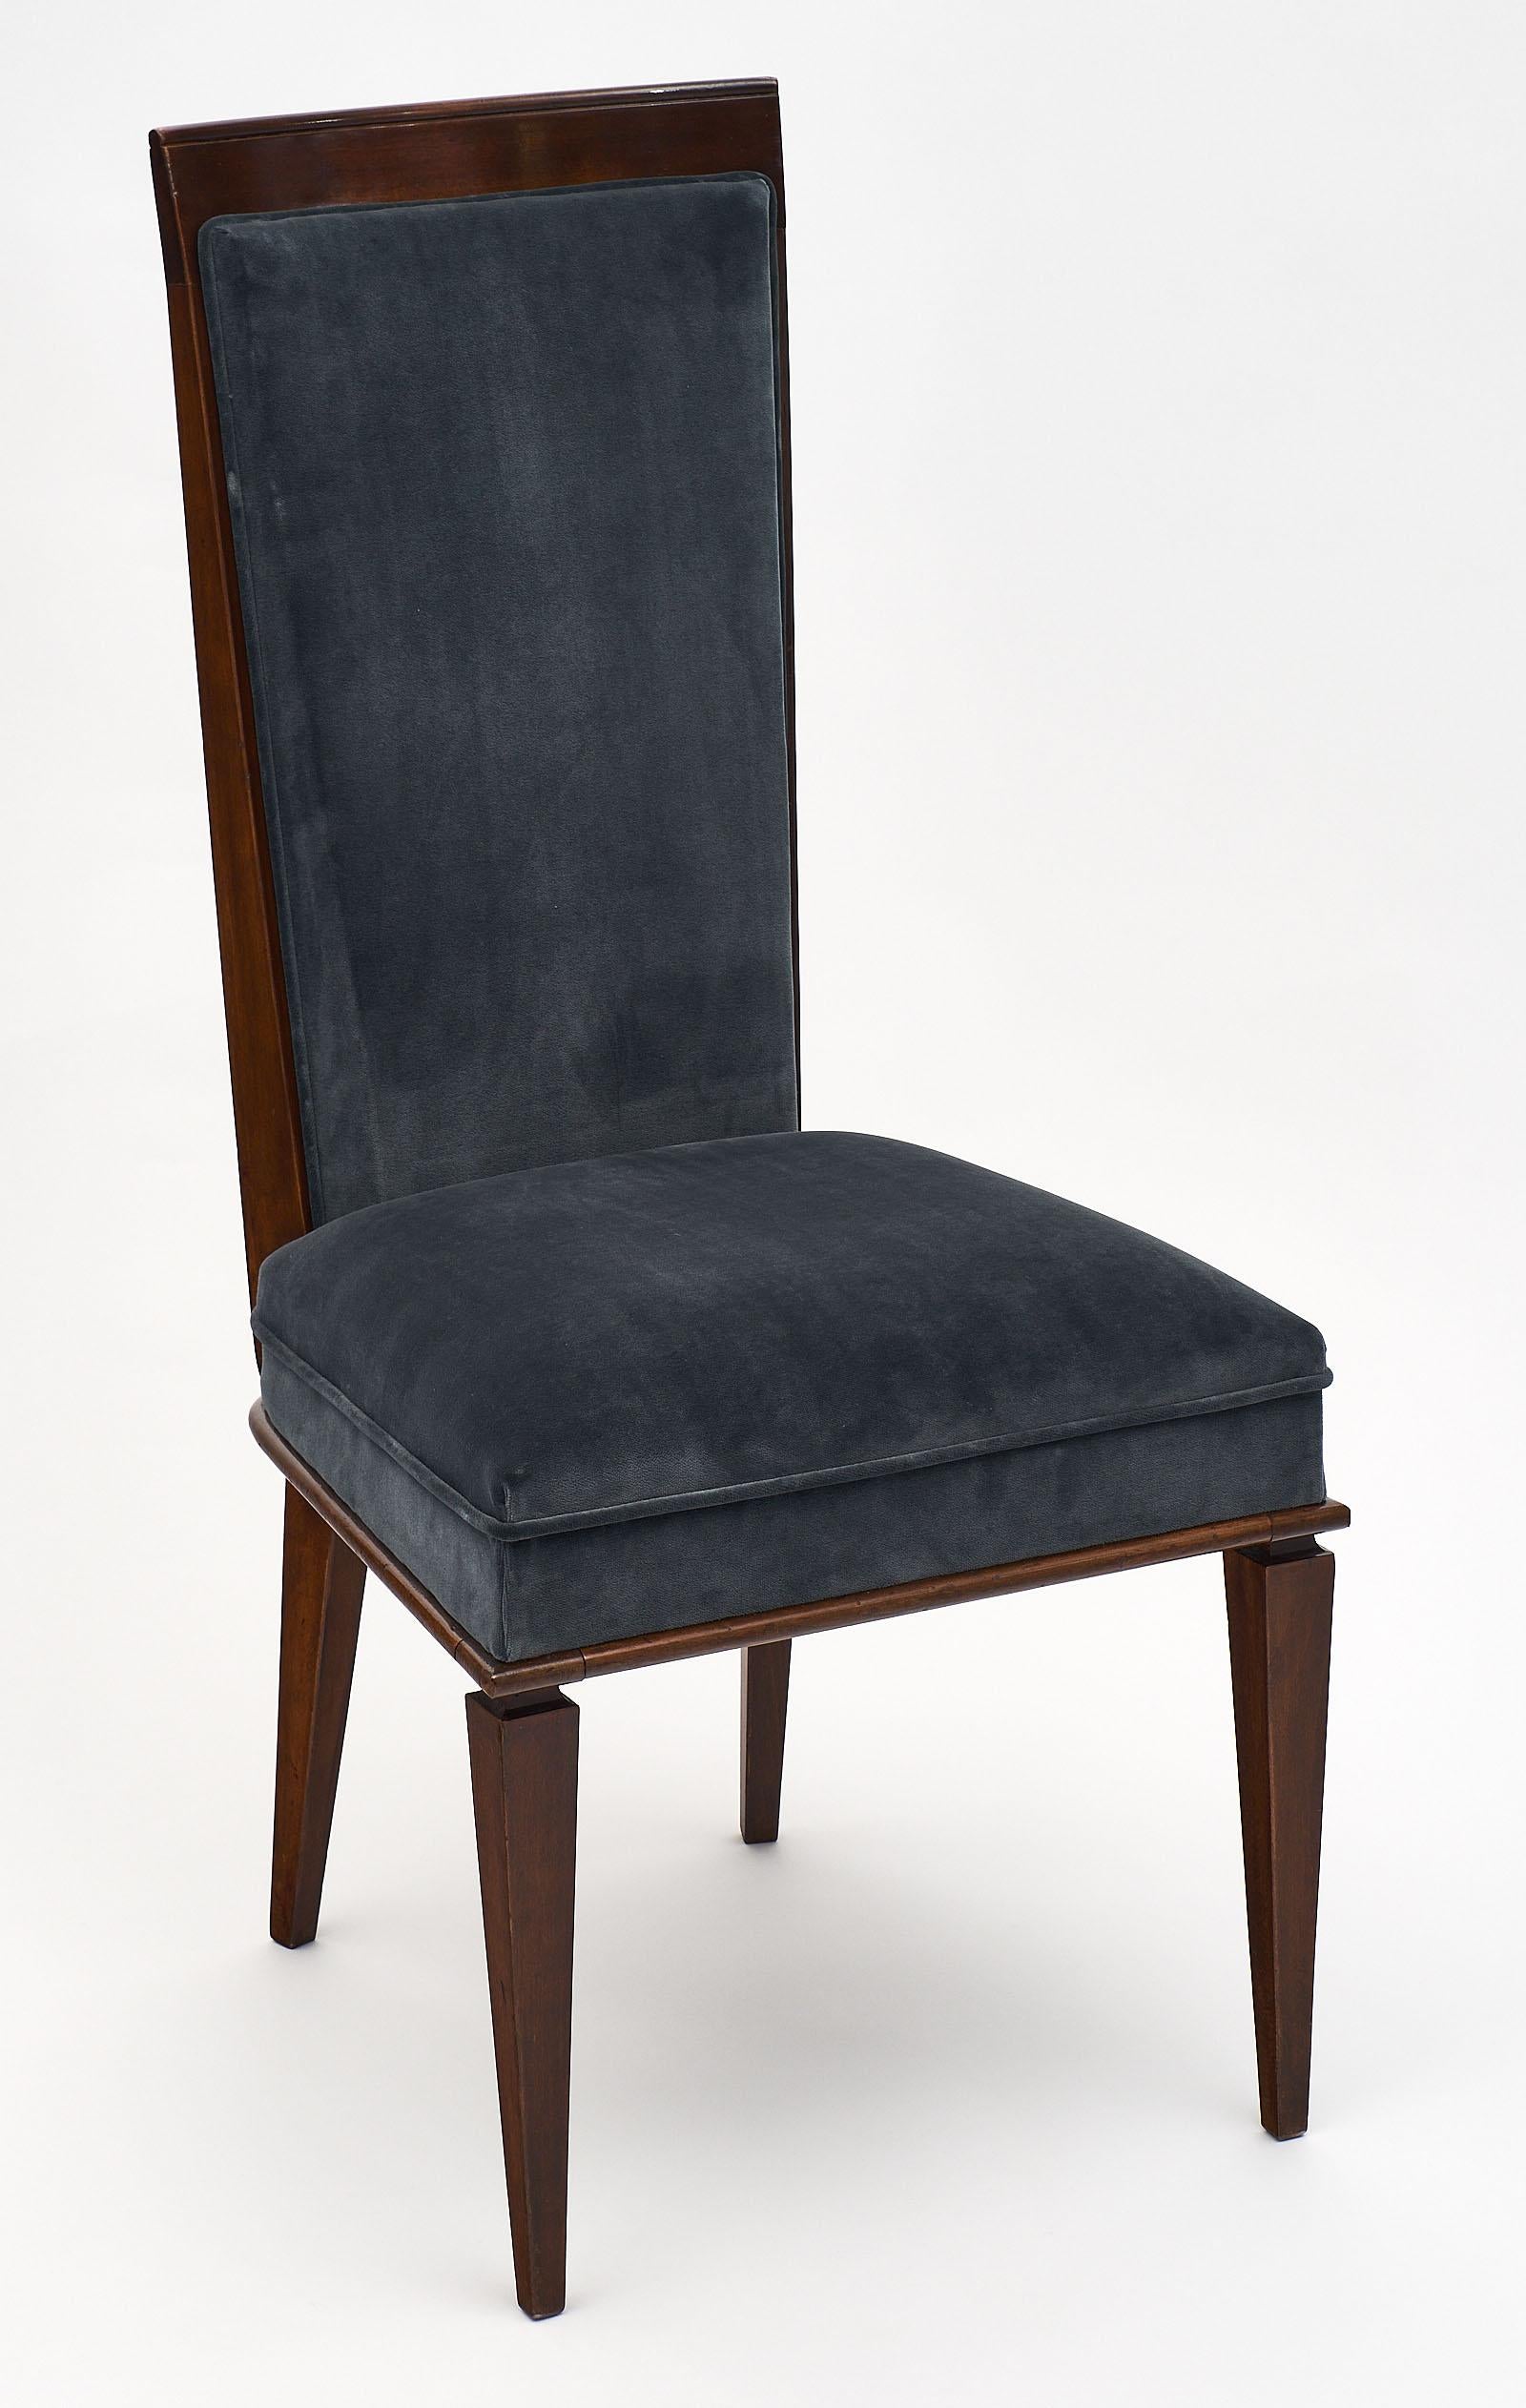 Dominique style Art Deco French dining chairs made of solid walnut with newly upholstered dark gray cotton velvet. They are very comfortable and sturdy, with elegant high backs.